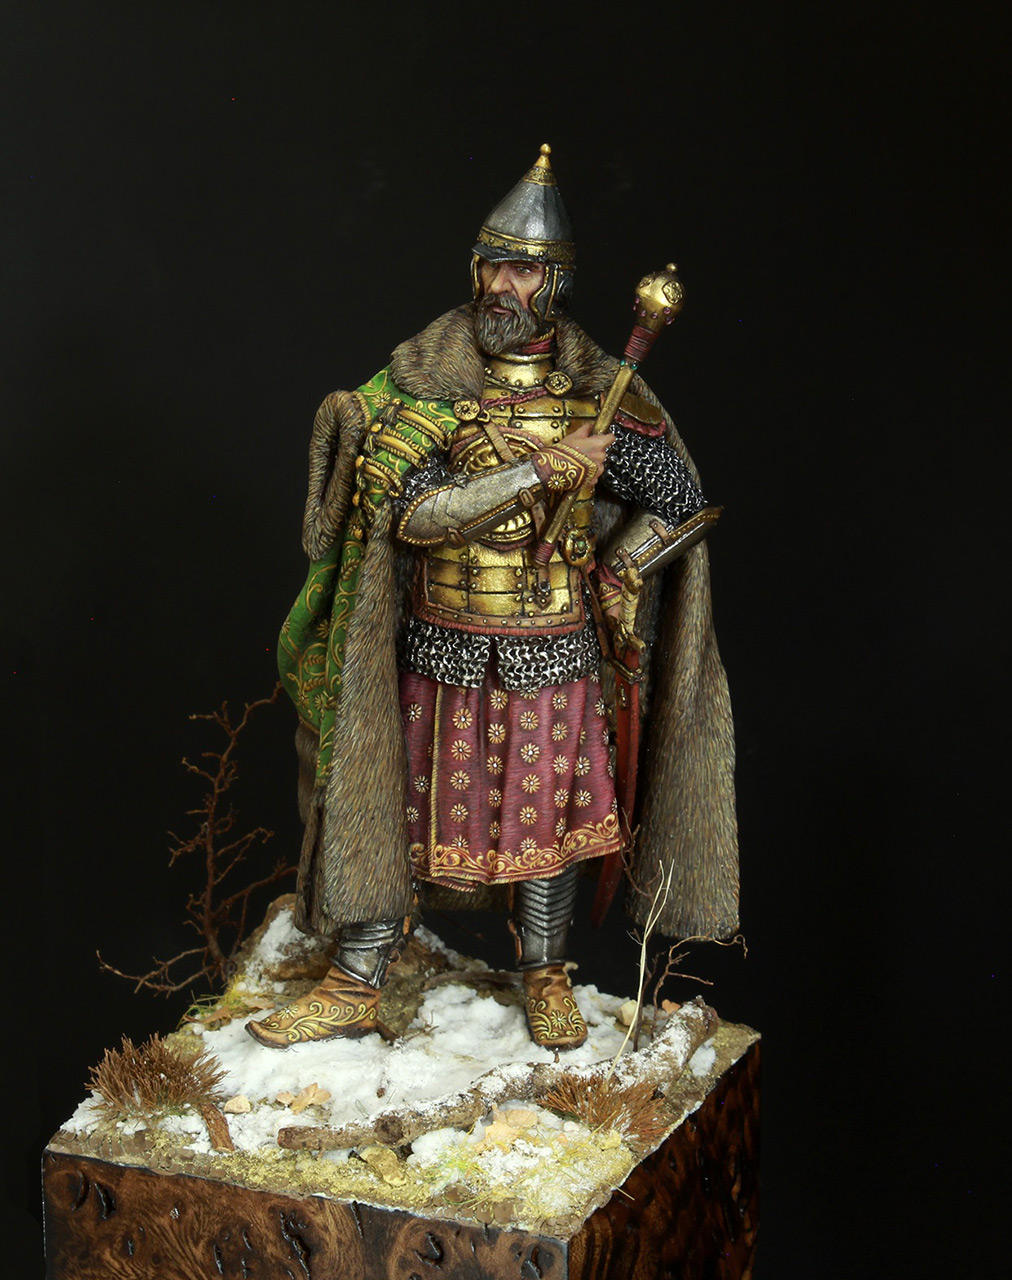 Figures: Moscow boyar warlord, 17th cent., photo #2